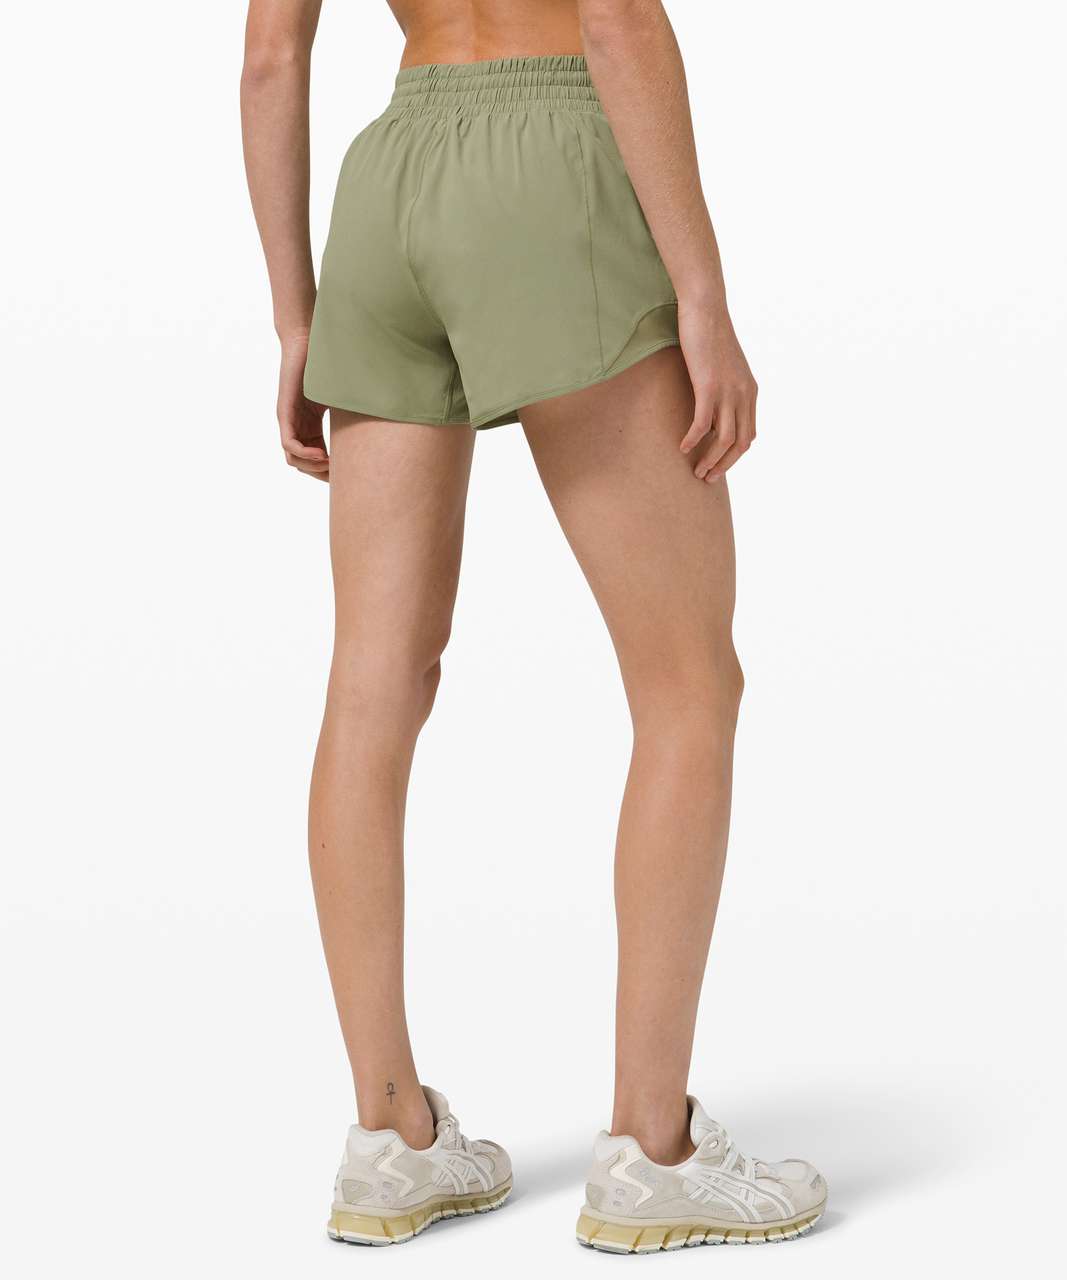 From zero to now 7 Hotty Hot shorts within a month! : r/lululemon